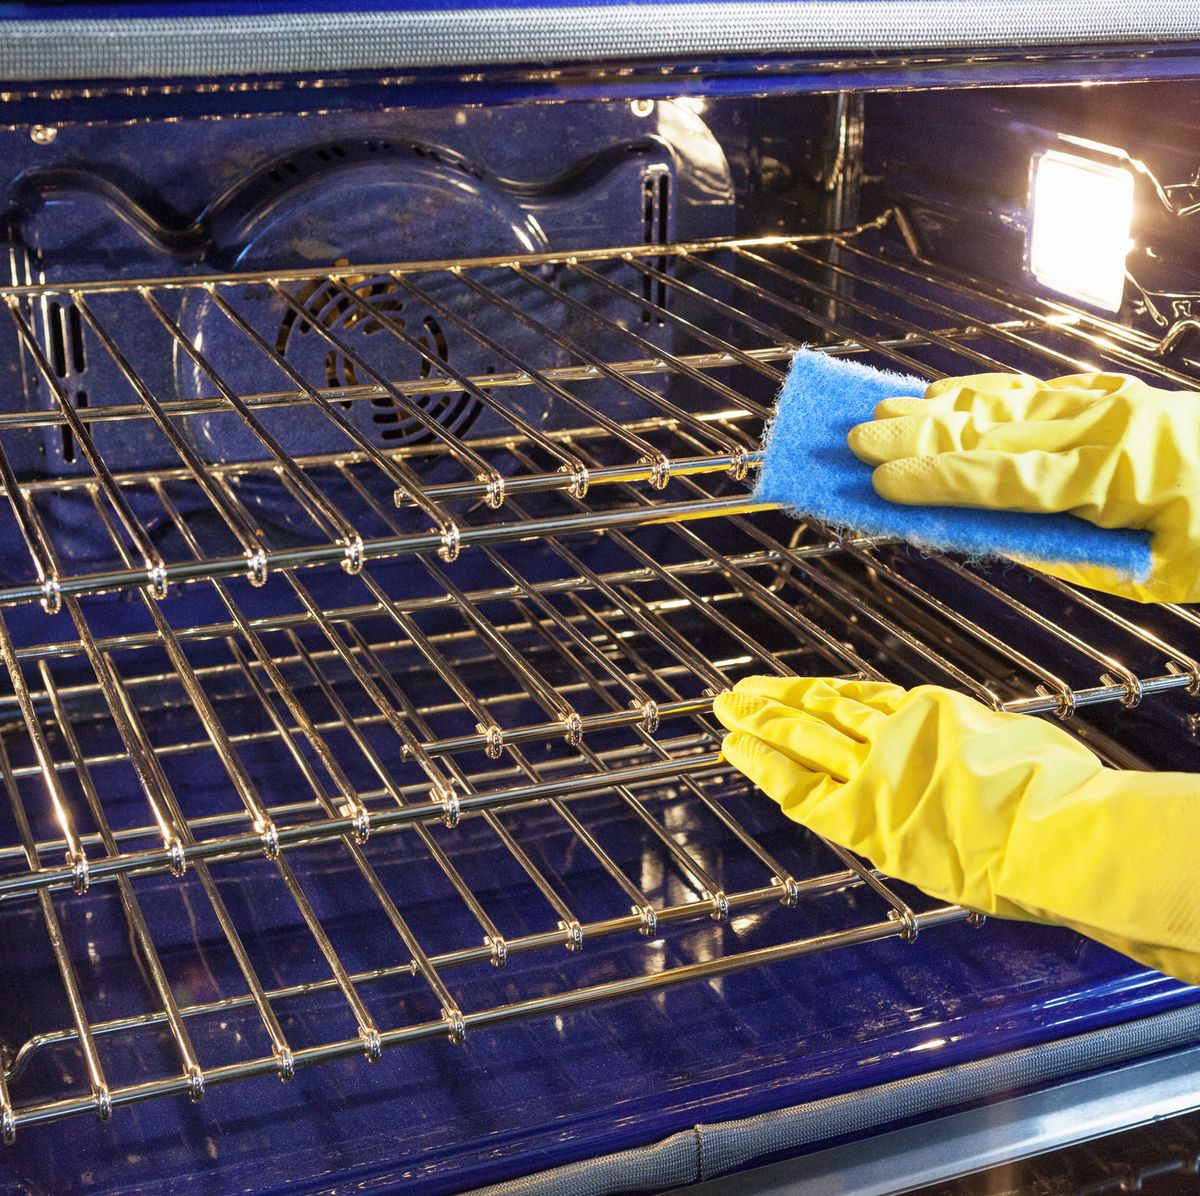 You Should Never Use Wet Oven Mitts. Here's Why